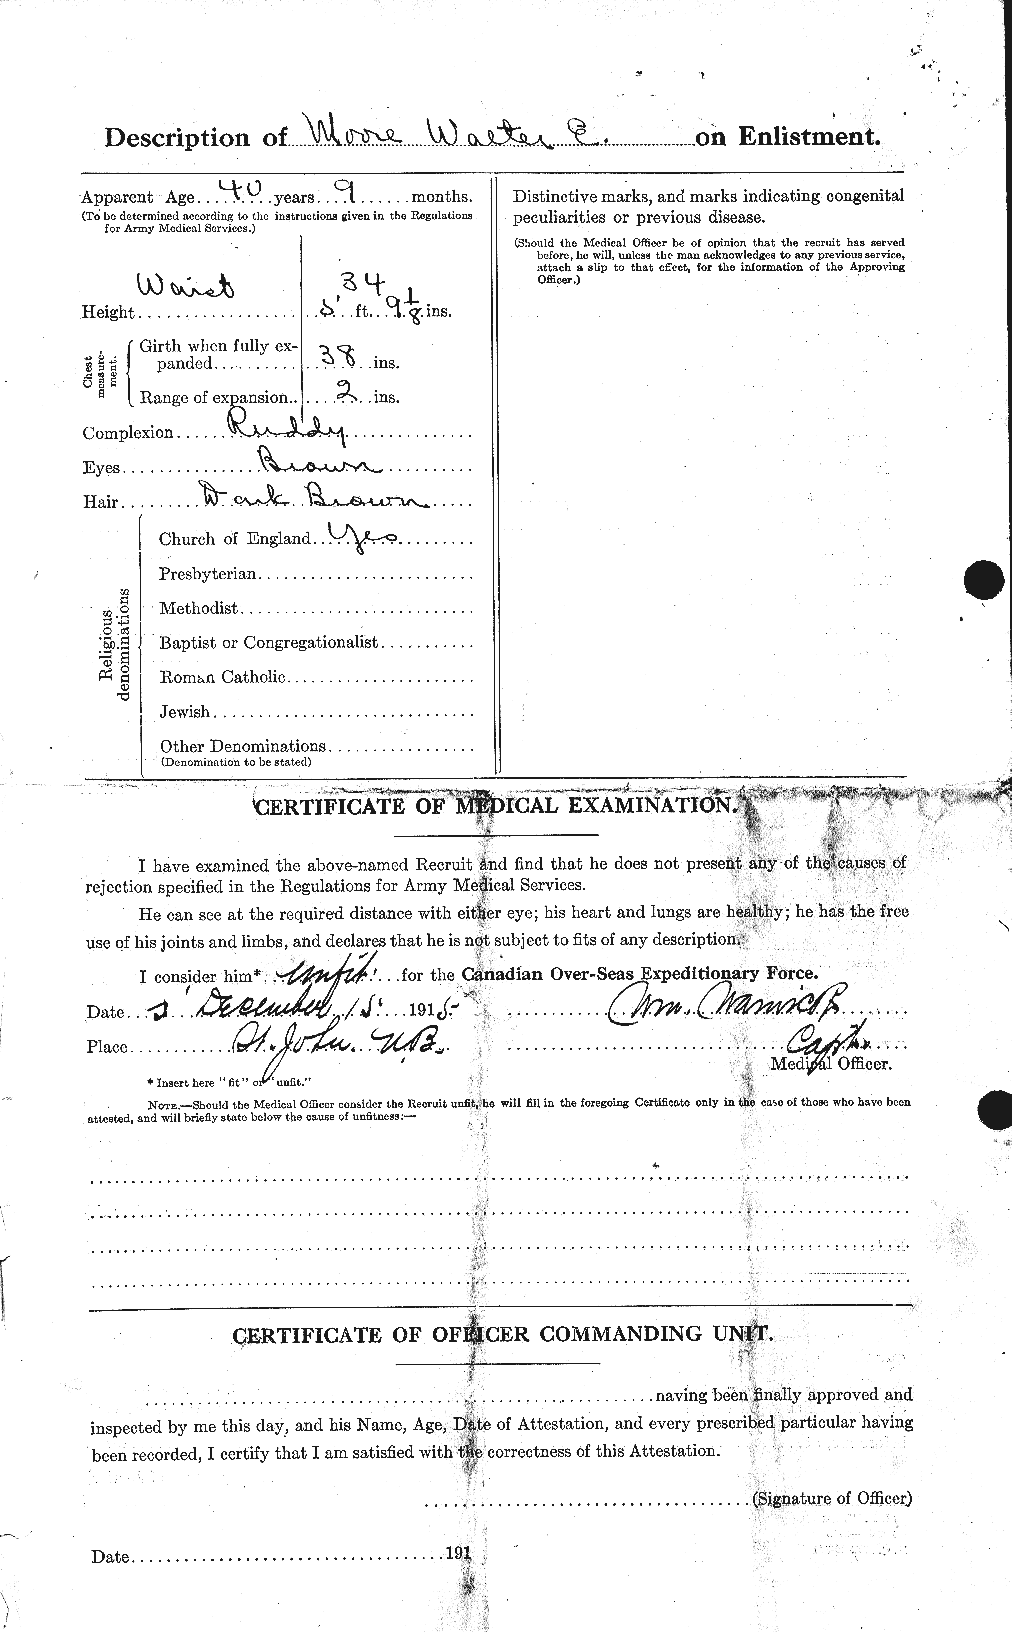 Personnel Records of the First World War - CEF 505703b